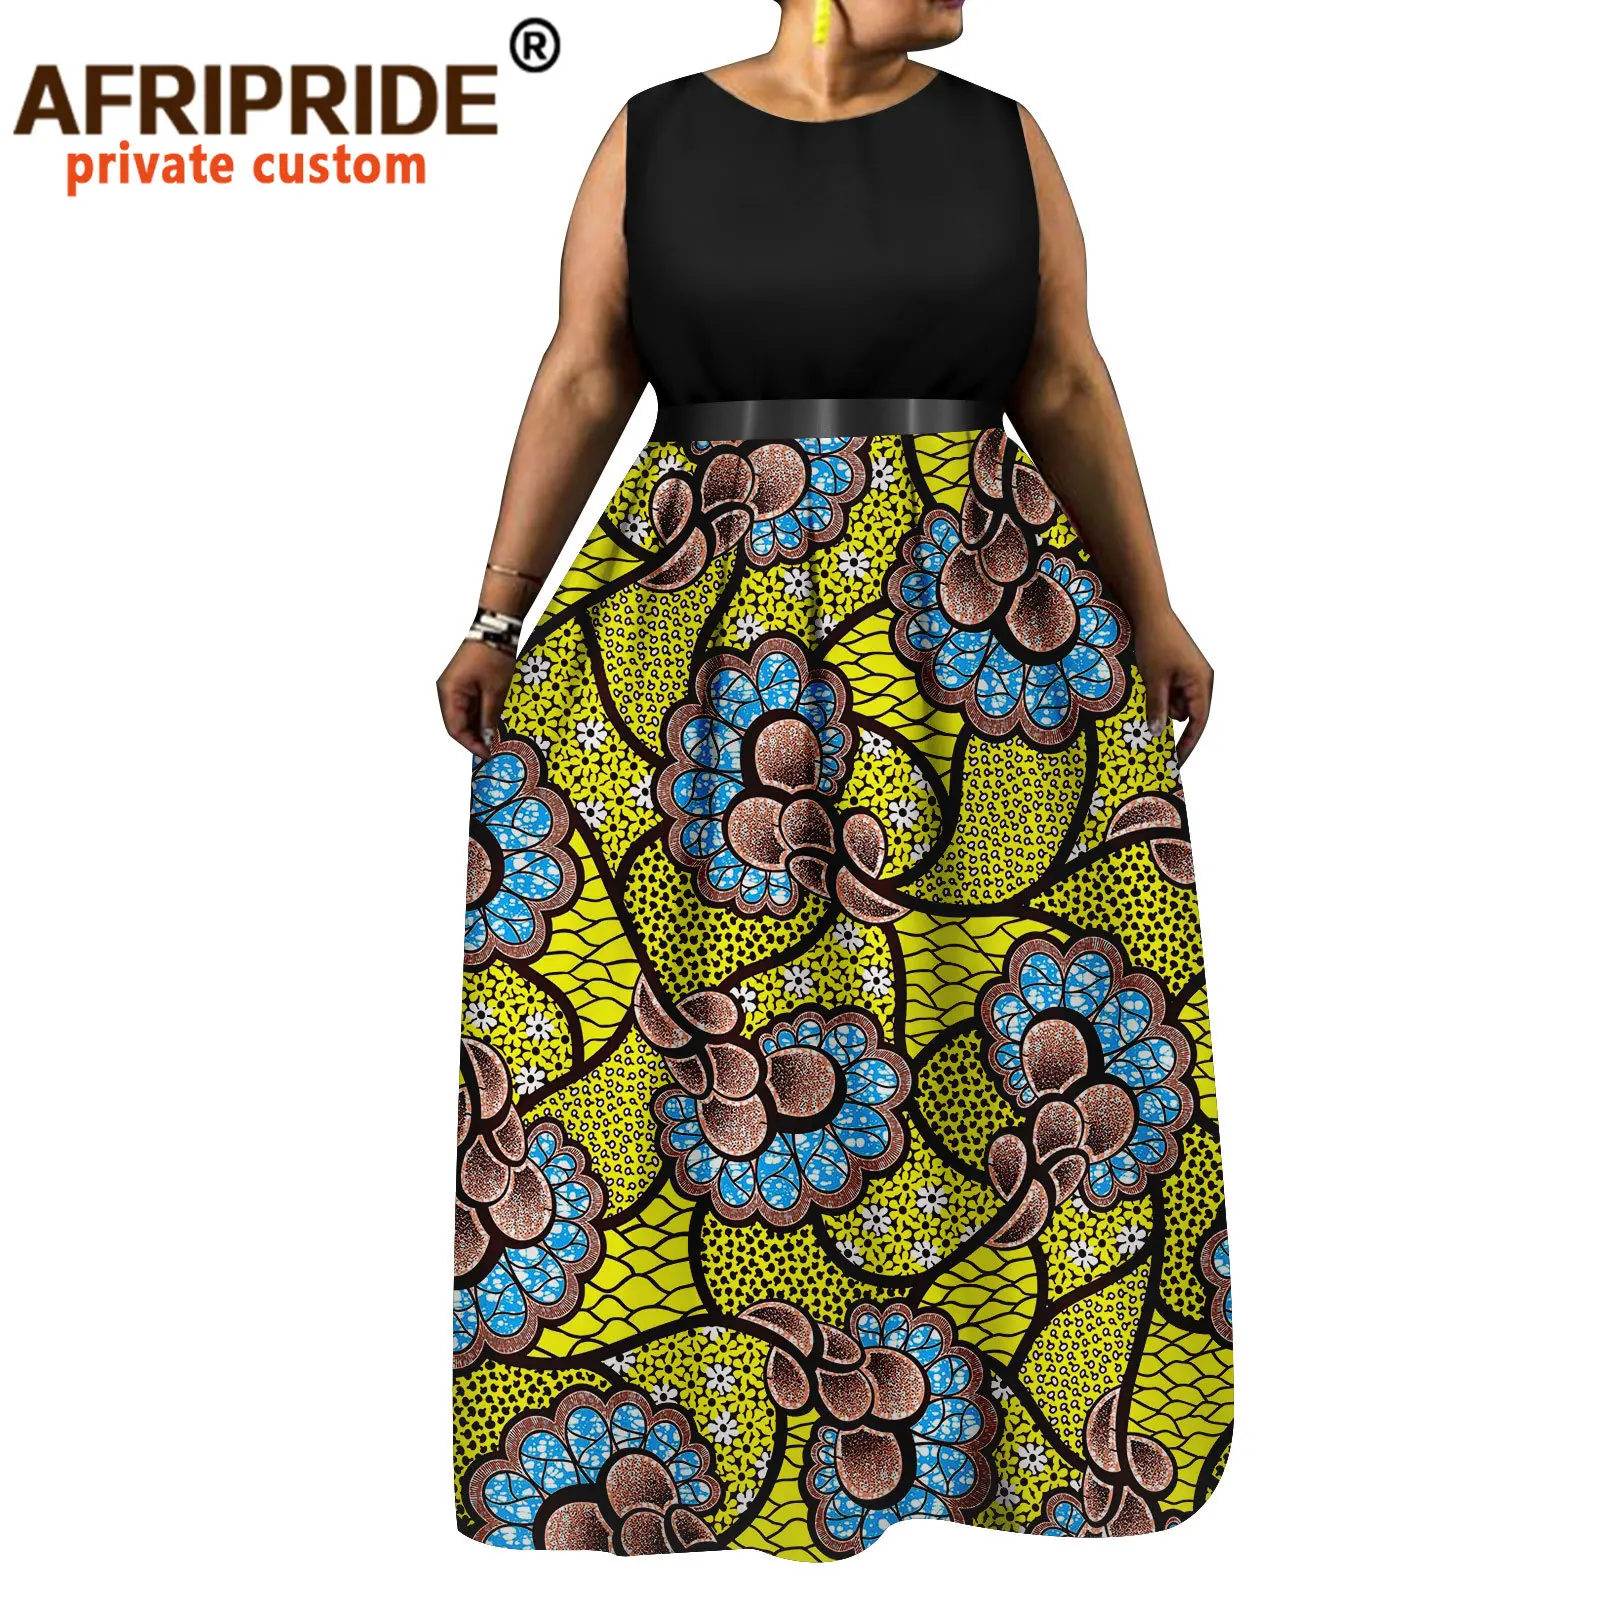 African Women's Plus Size Sleeveless Dress Vintage Patchwork Ankara Printed Cotton Loose Belt with Accessories Dress A2225136